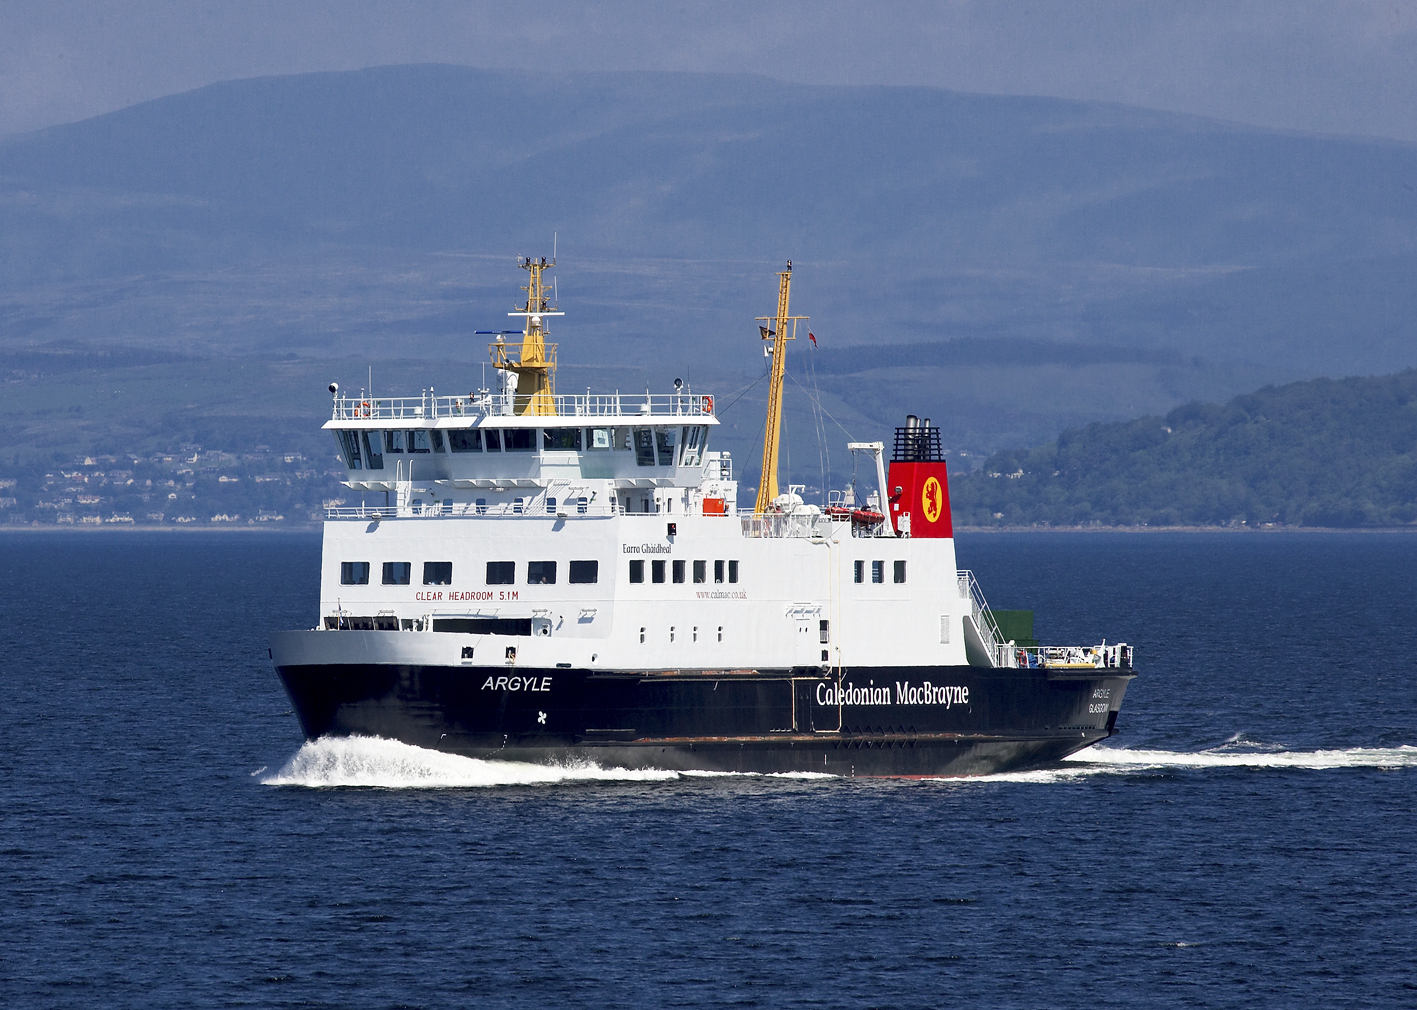 CalMac is ferrying thousands of passengers every week.